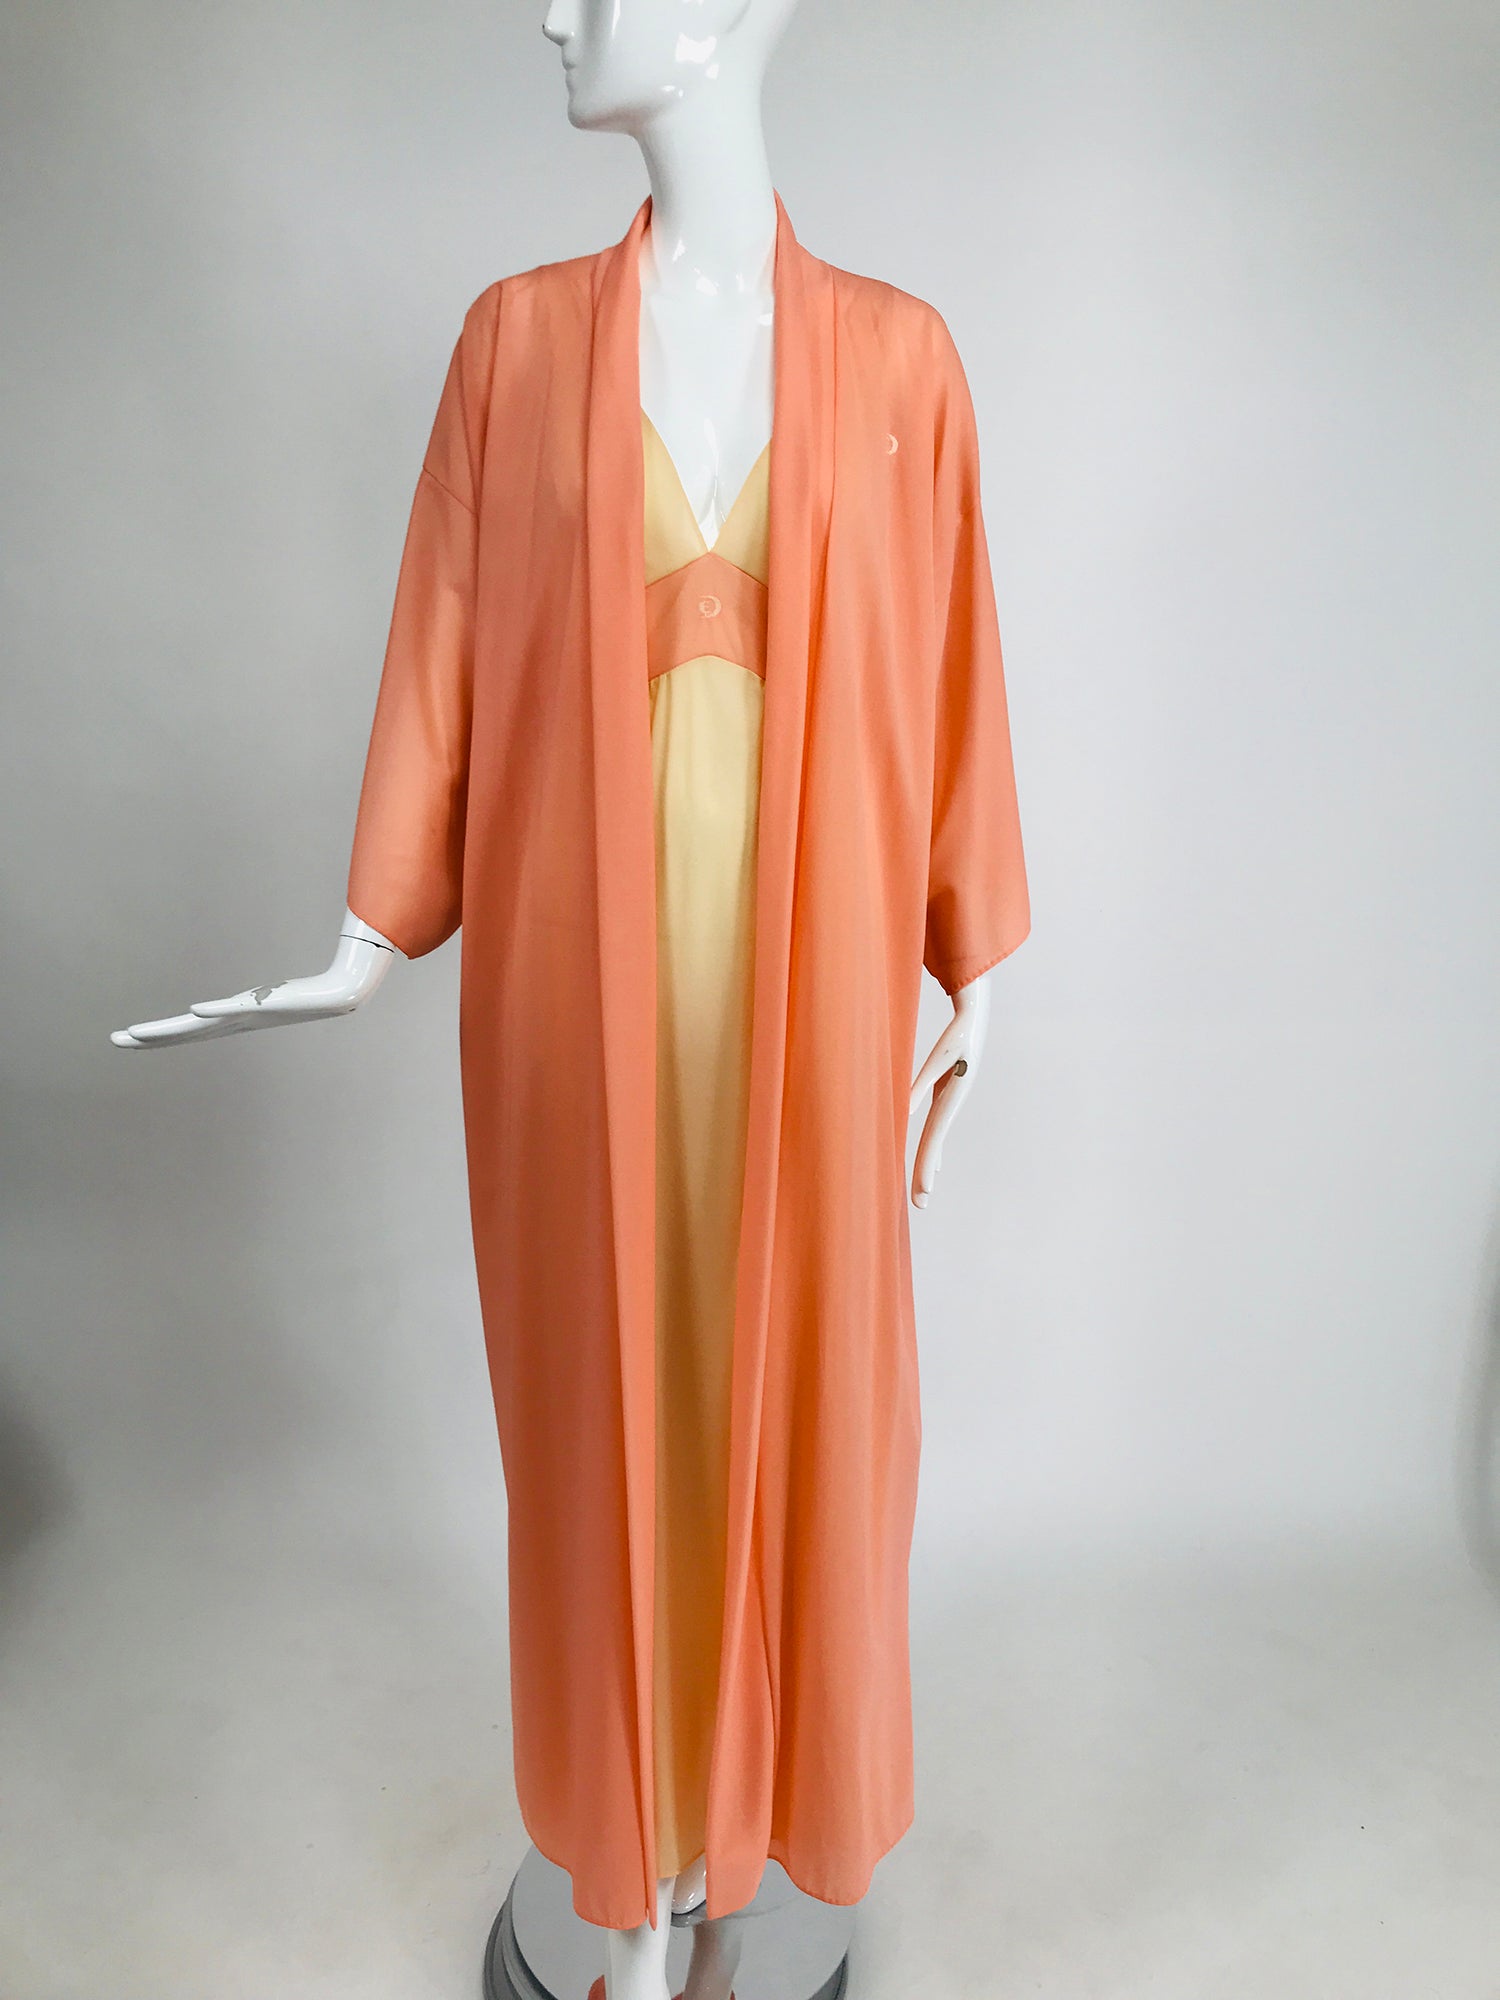 Emilio Pucci Nightgown and Robe Set 2pc Set Loungewear Vintage 70s